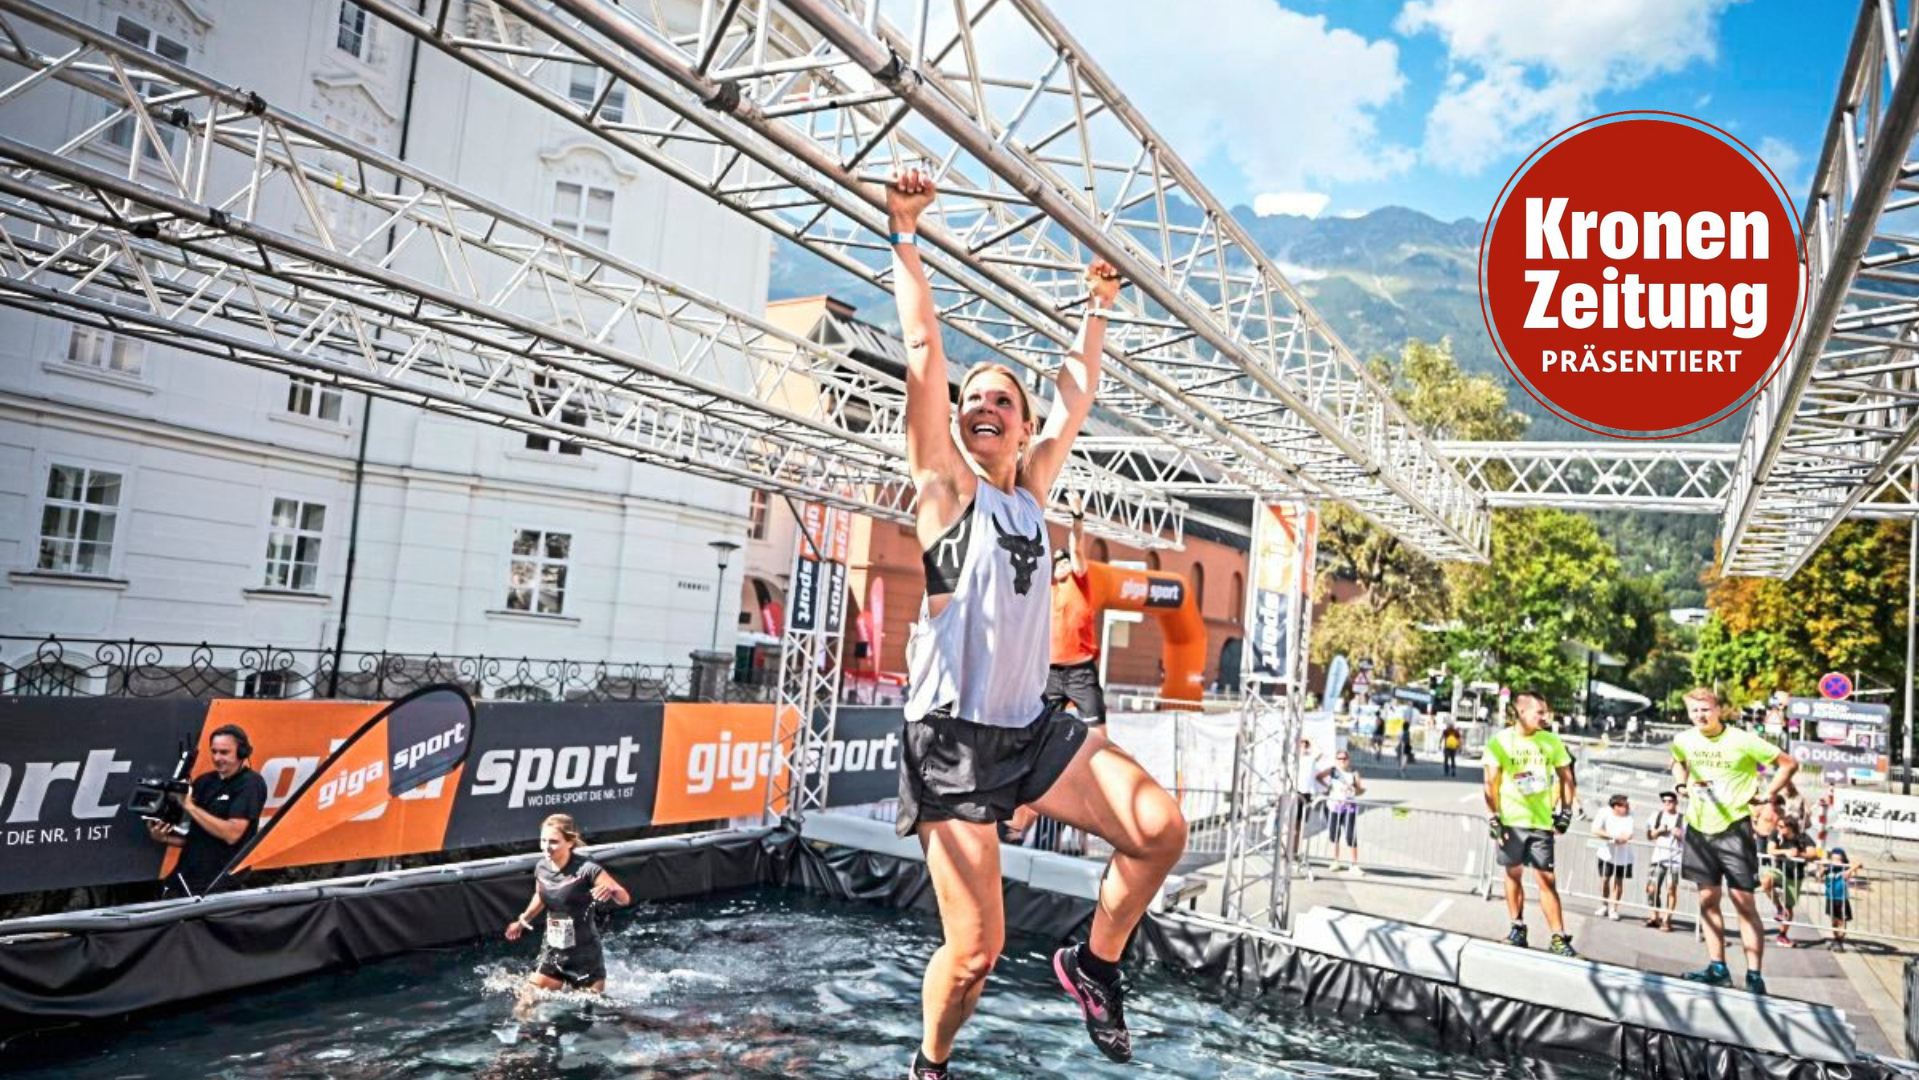 On June 29, the brave will once again take on the obstacle course through the provincial capital. (Bild: Sportograf Company Code)